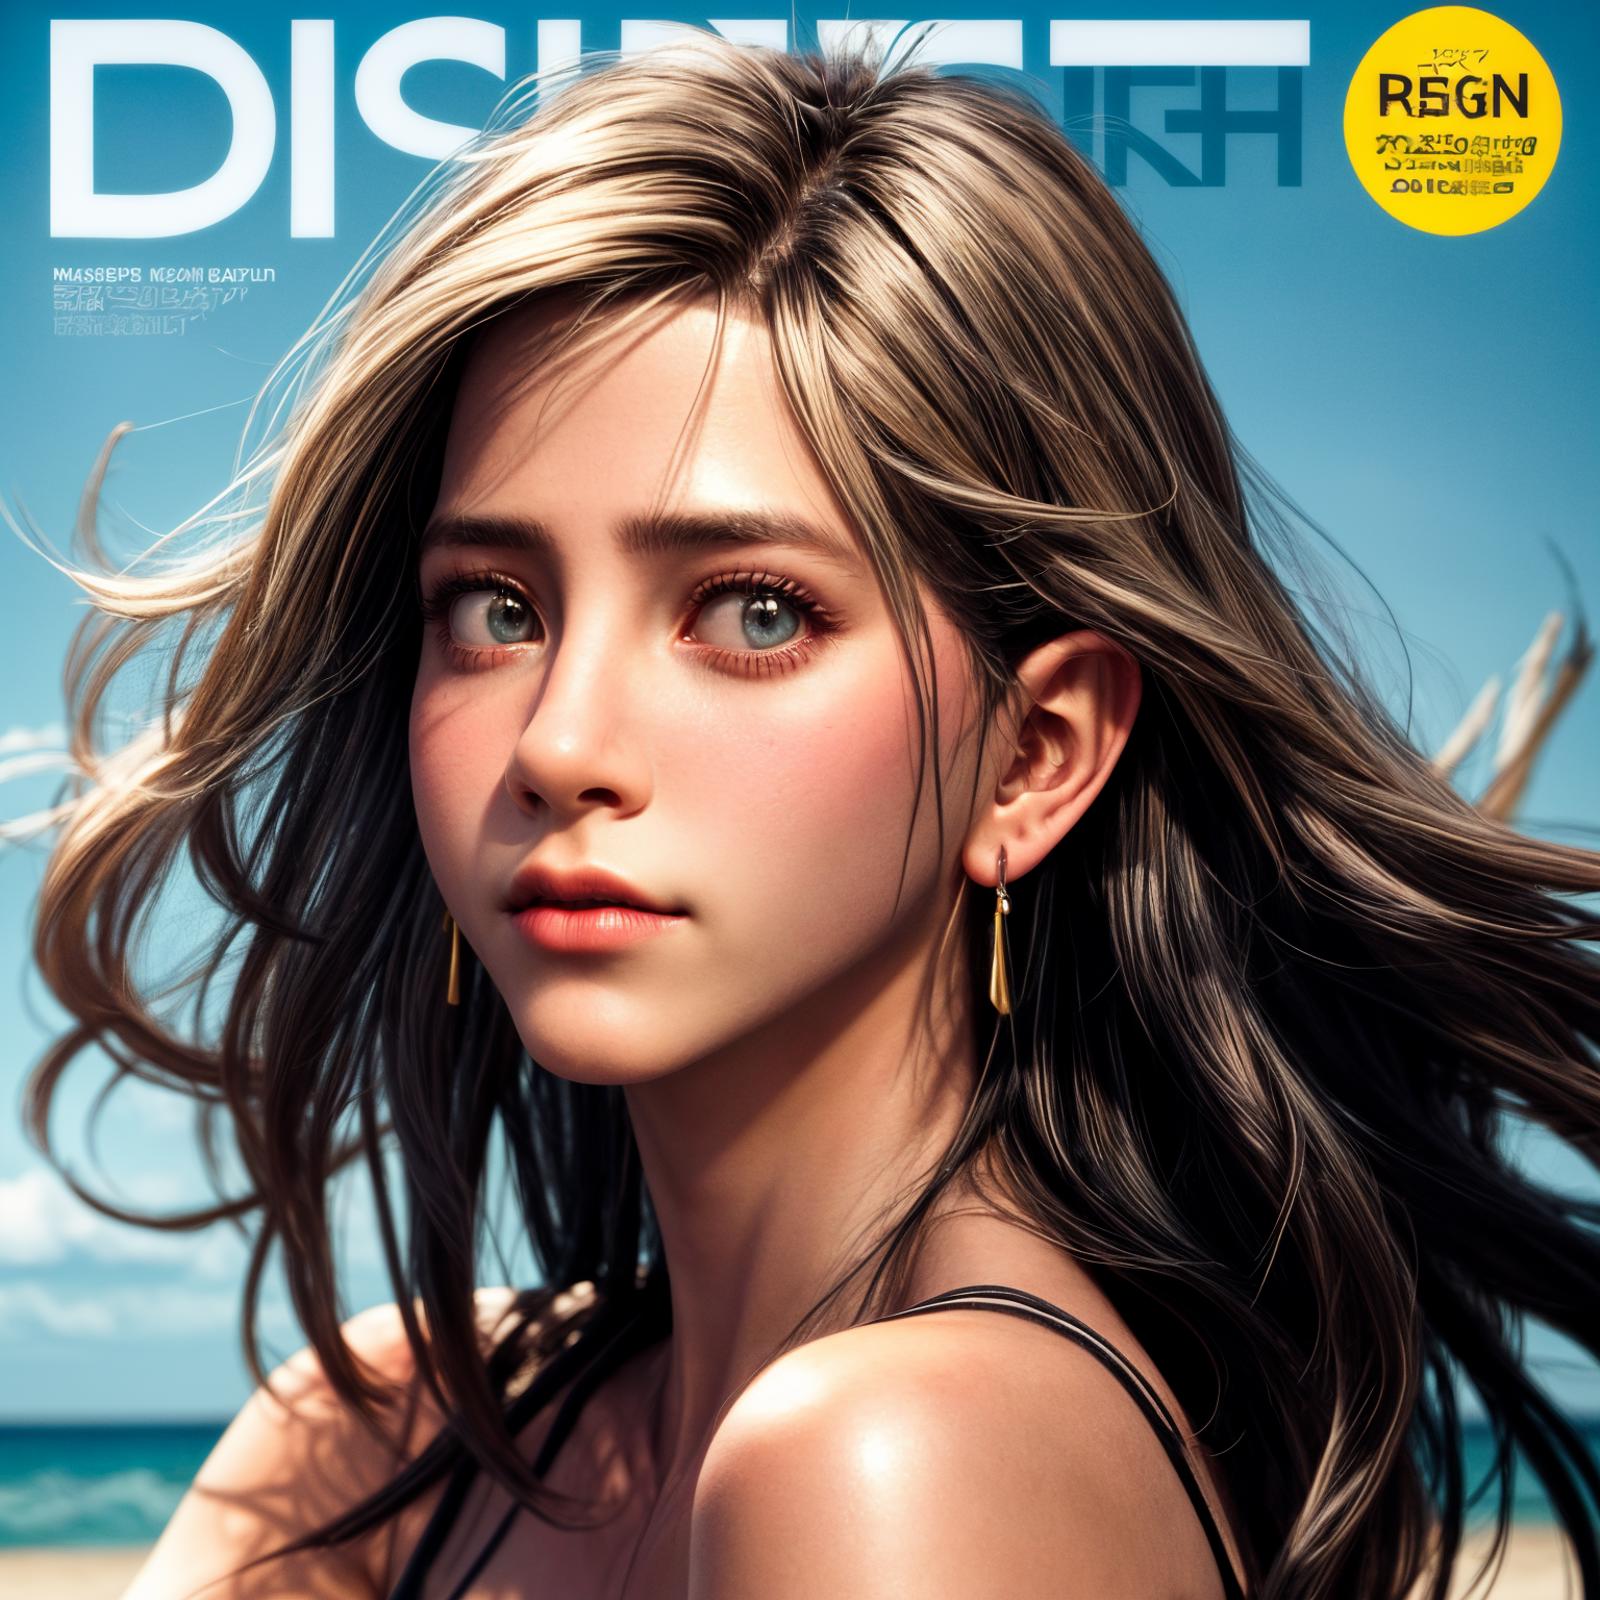 Blonde woman with blue eyes and nose on a magazine cover.